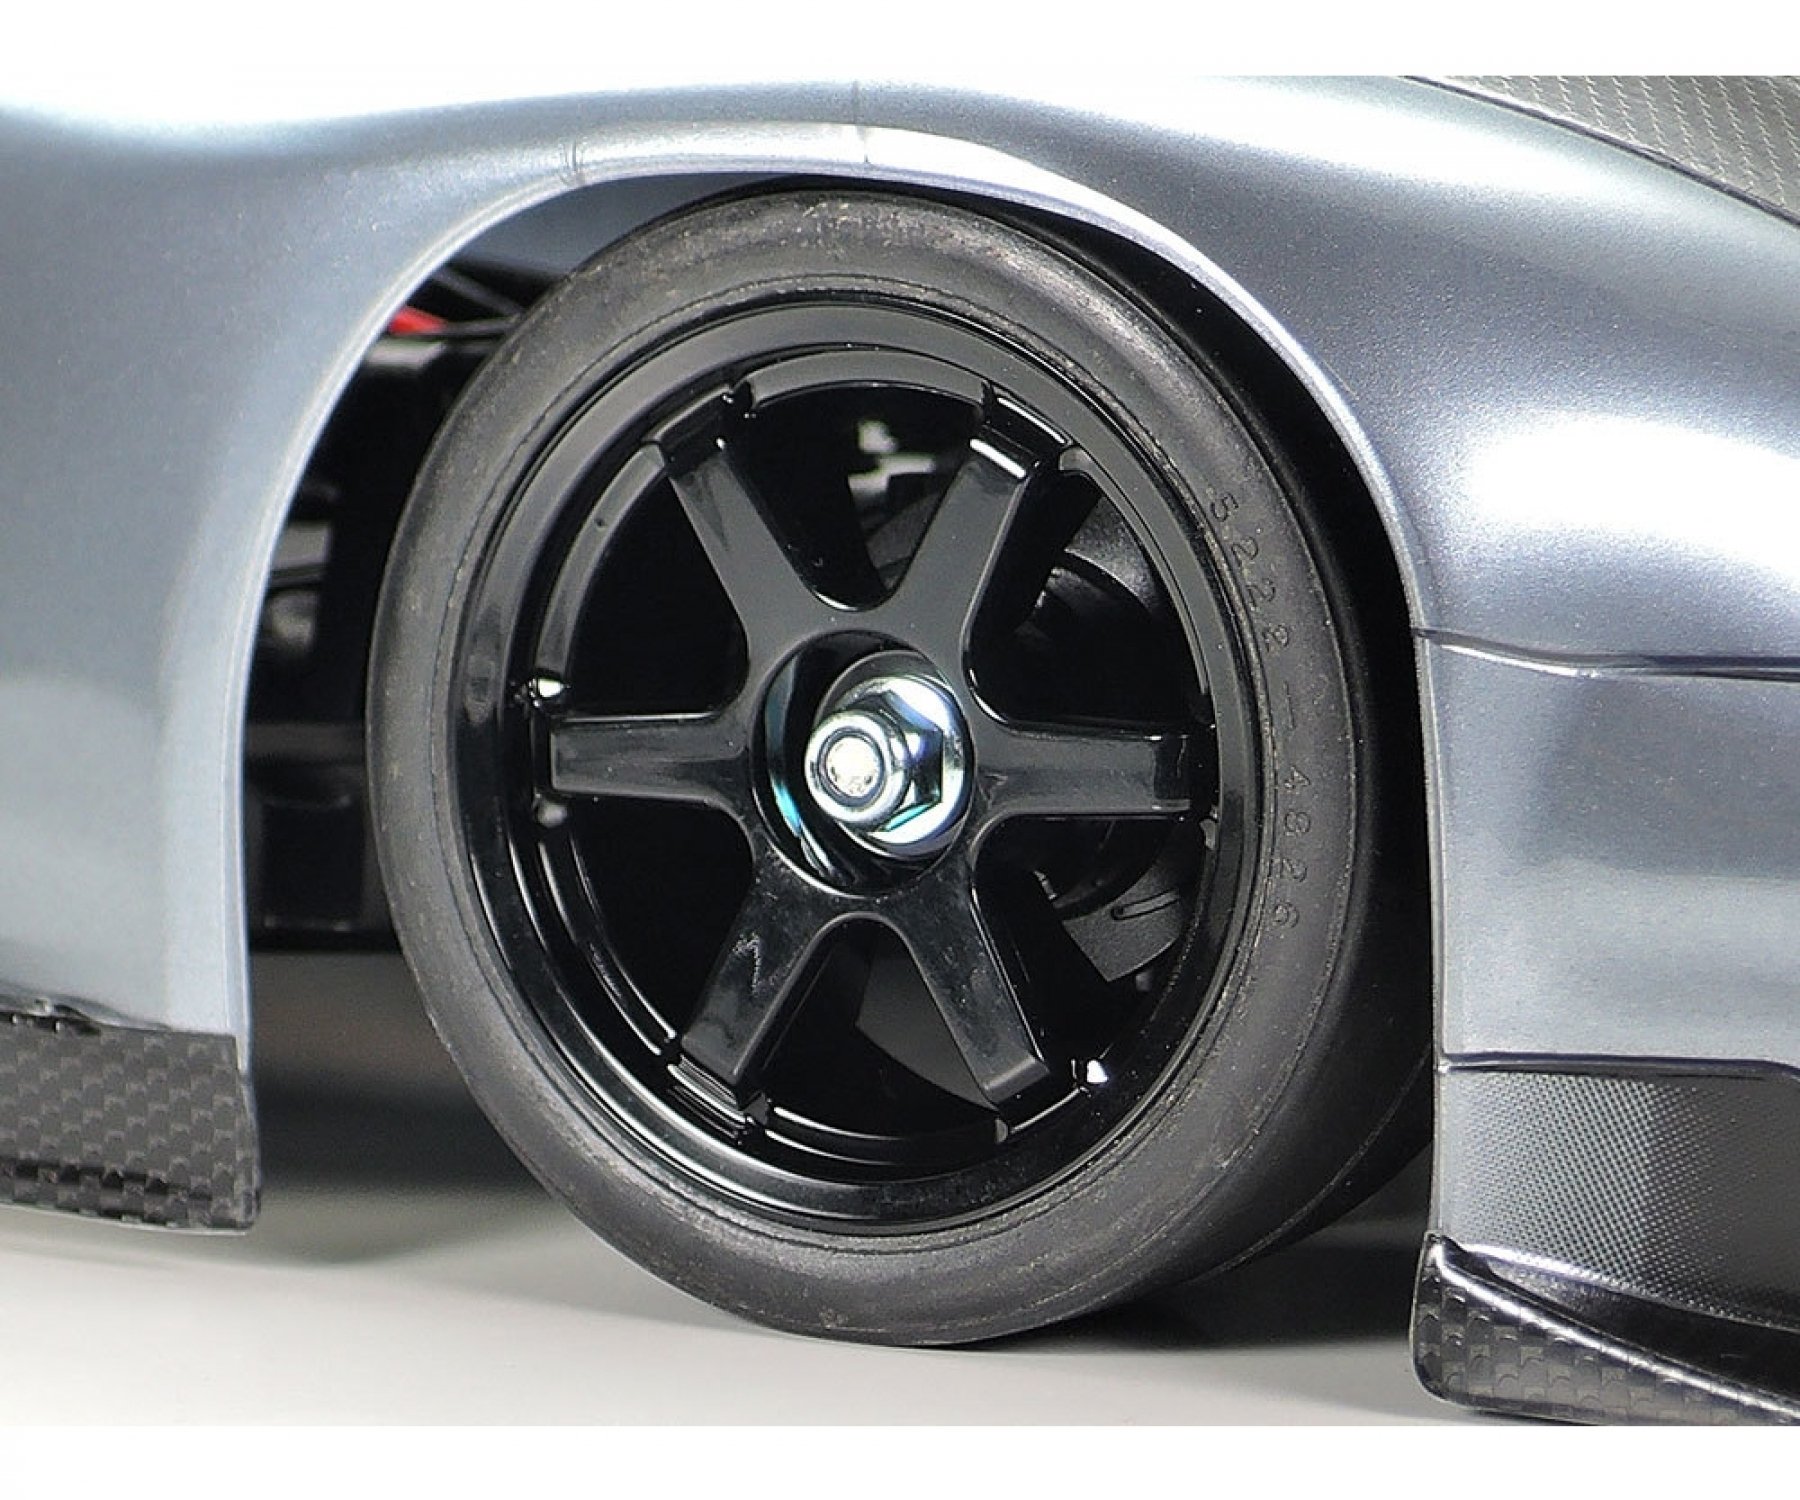 Black six-spoke wheels with racing slick tyres ensure that this model has a stylish air.